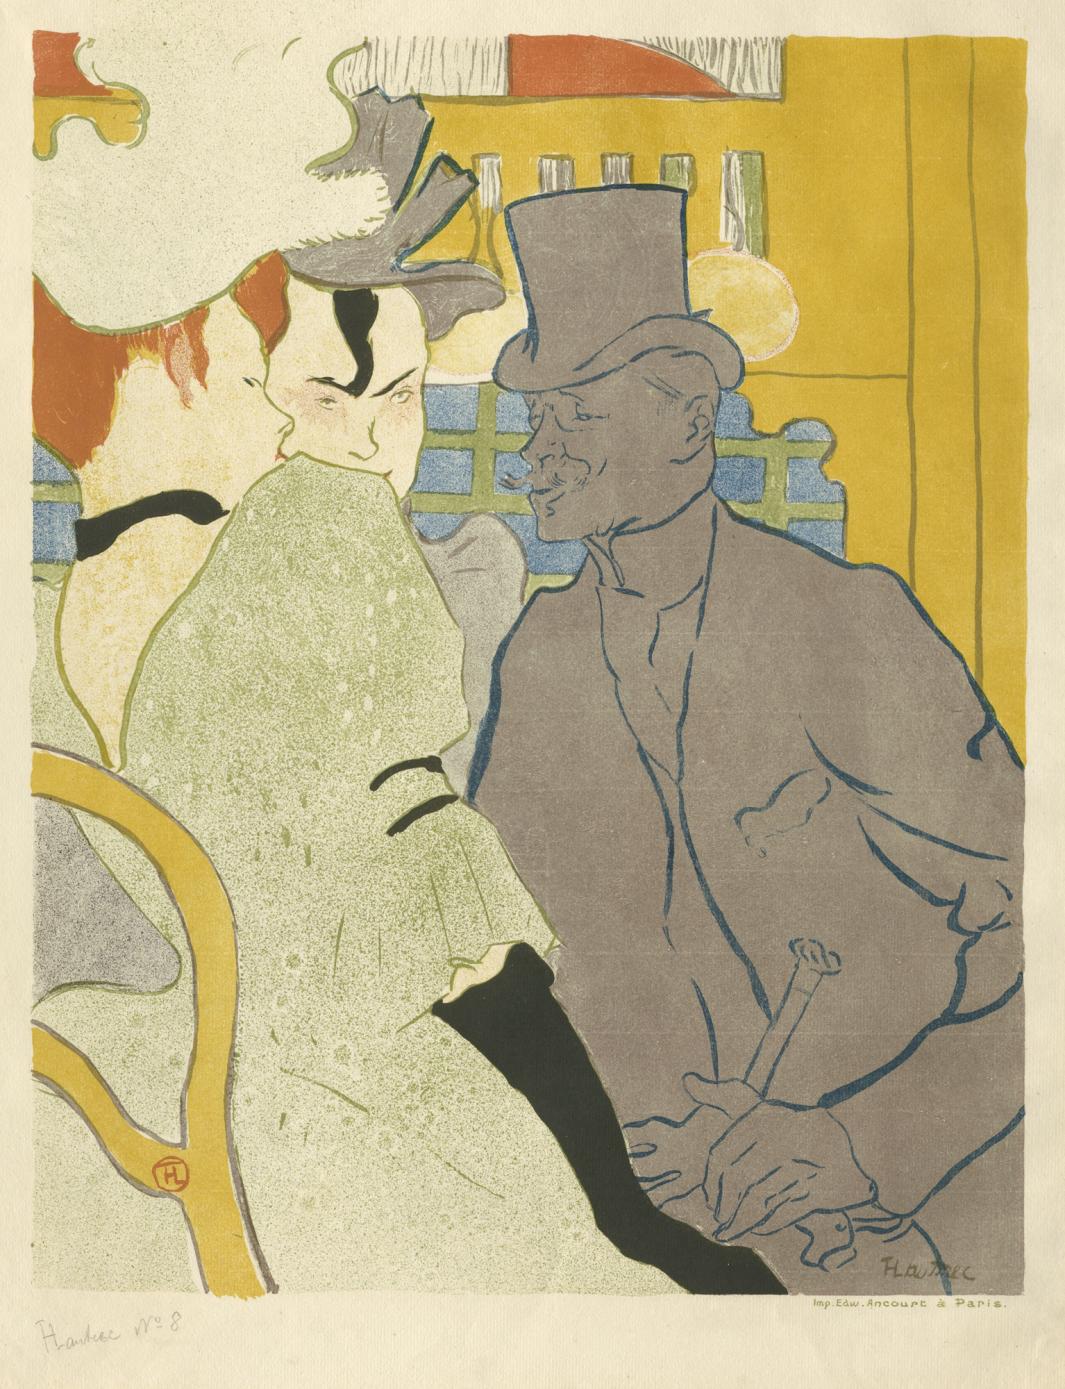 Color print of a man and two women in conversation